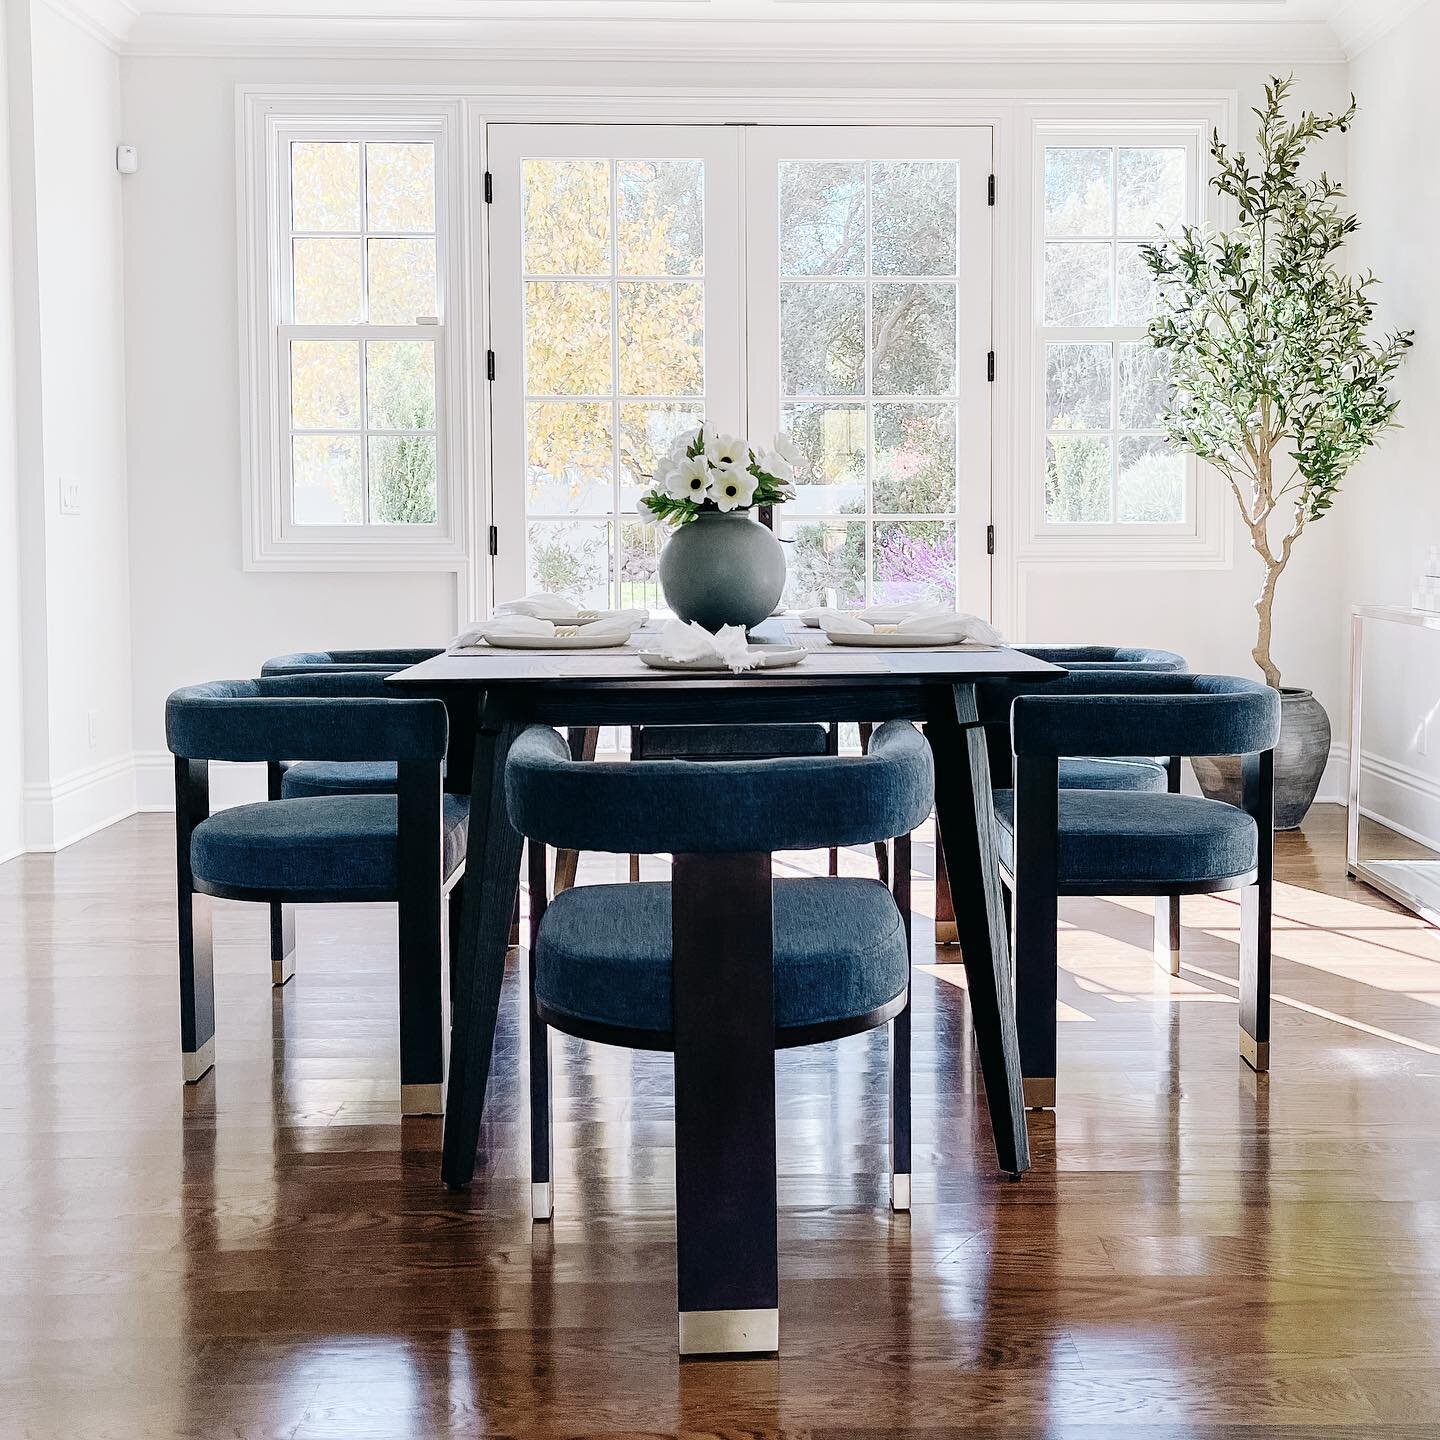 A light and bright sophisticated dining space where dinner parties await 

Home staging @thekinhome 
Styling @jenjacksondesign